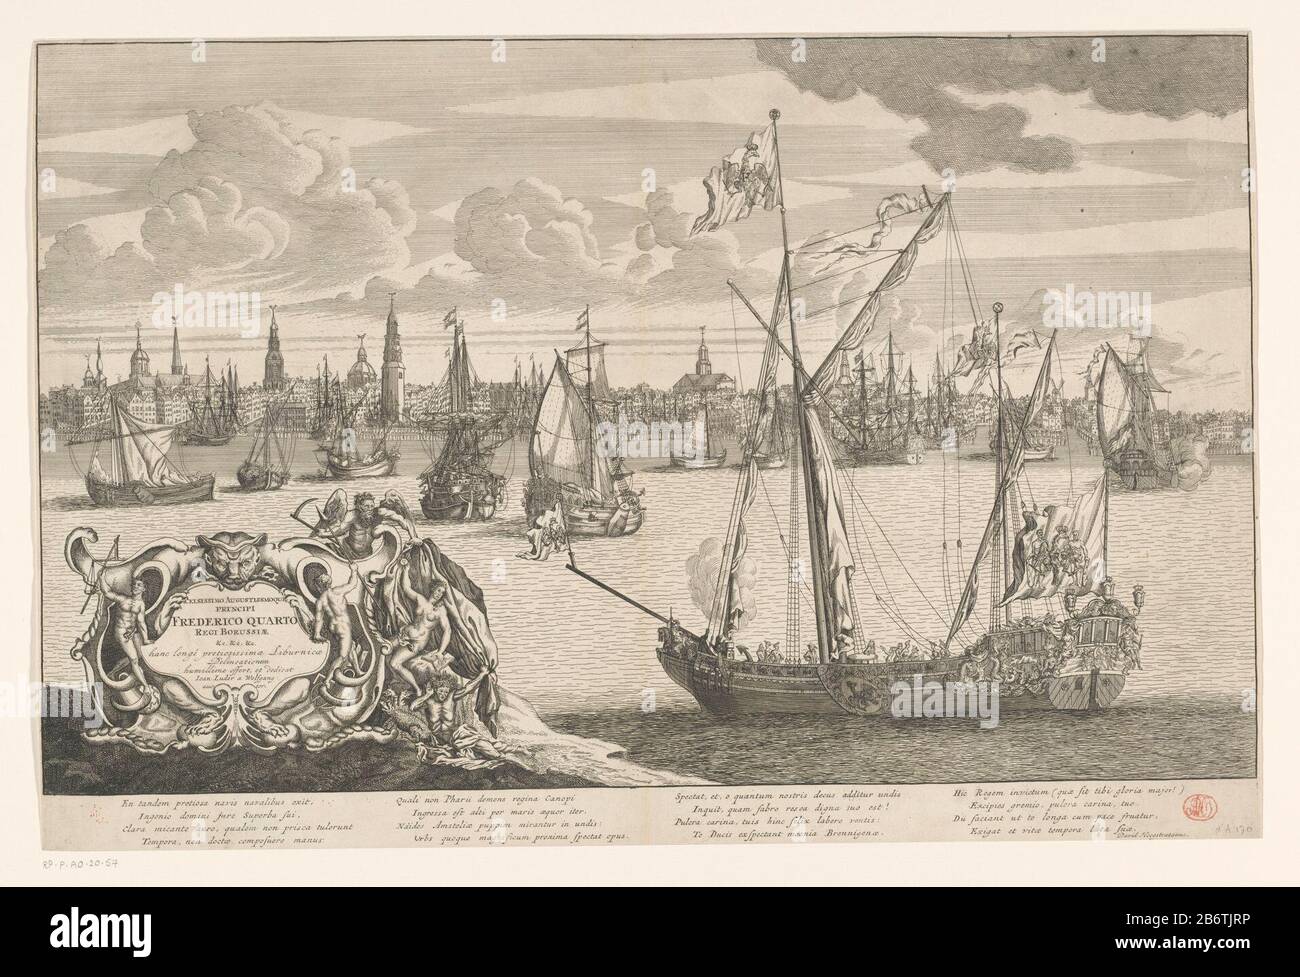 Het jacht geschonken door de Staten-Generaal aan koning Frederik I van Pruisen, 1707 Face the richly decorated yacht donated by the States General of king Frederick I of Prussia, ca. 1707. the yacht on the water of the IJ, Amsterdam in the background. On the left the command in an ornamental cartouche with a fantasy being and allegorical figures. In the caption verse 16 lines in Latijn. Manufacturer : printmaker Joan Luder à Wolfgang (possible) printmaker: anonymous design by Joan Luder à Wolfgang (listed property) writer: David Fransz. Hoogstraten (listed on object) commissioned by Joan Luder Stock Photo